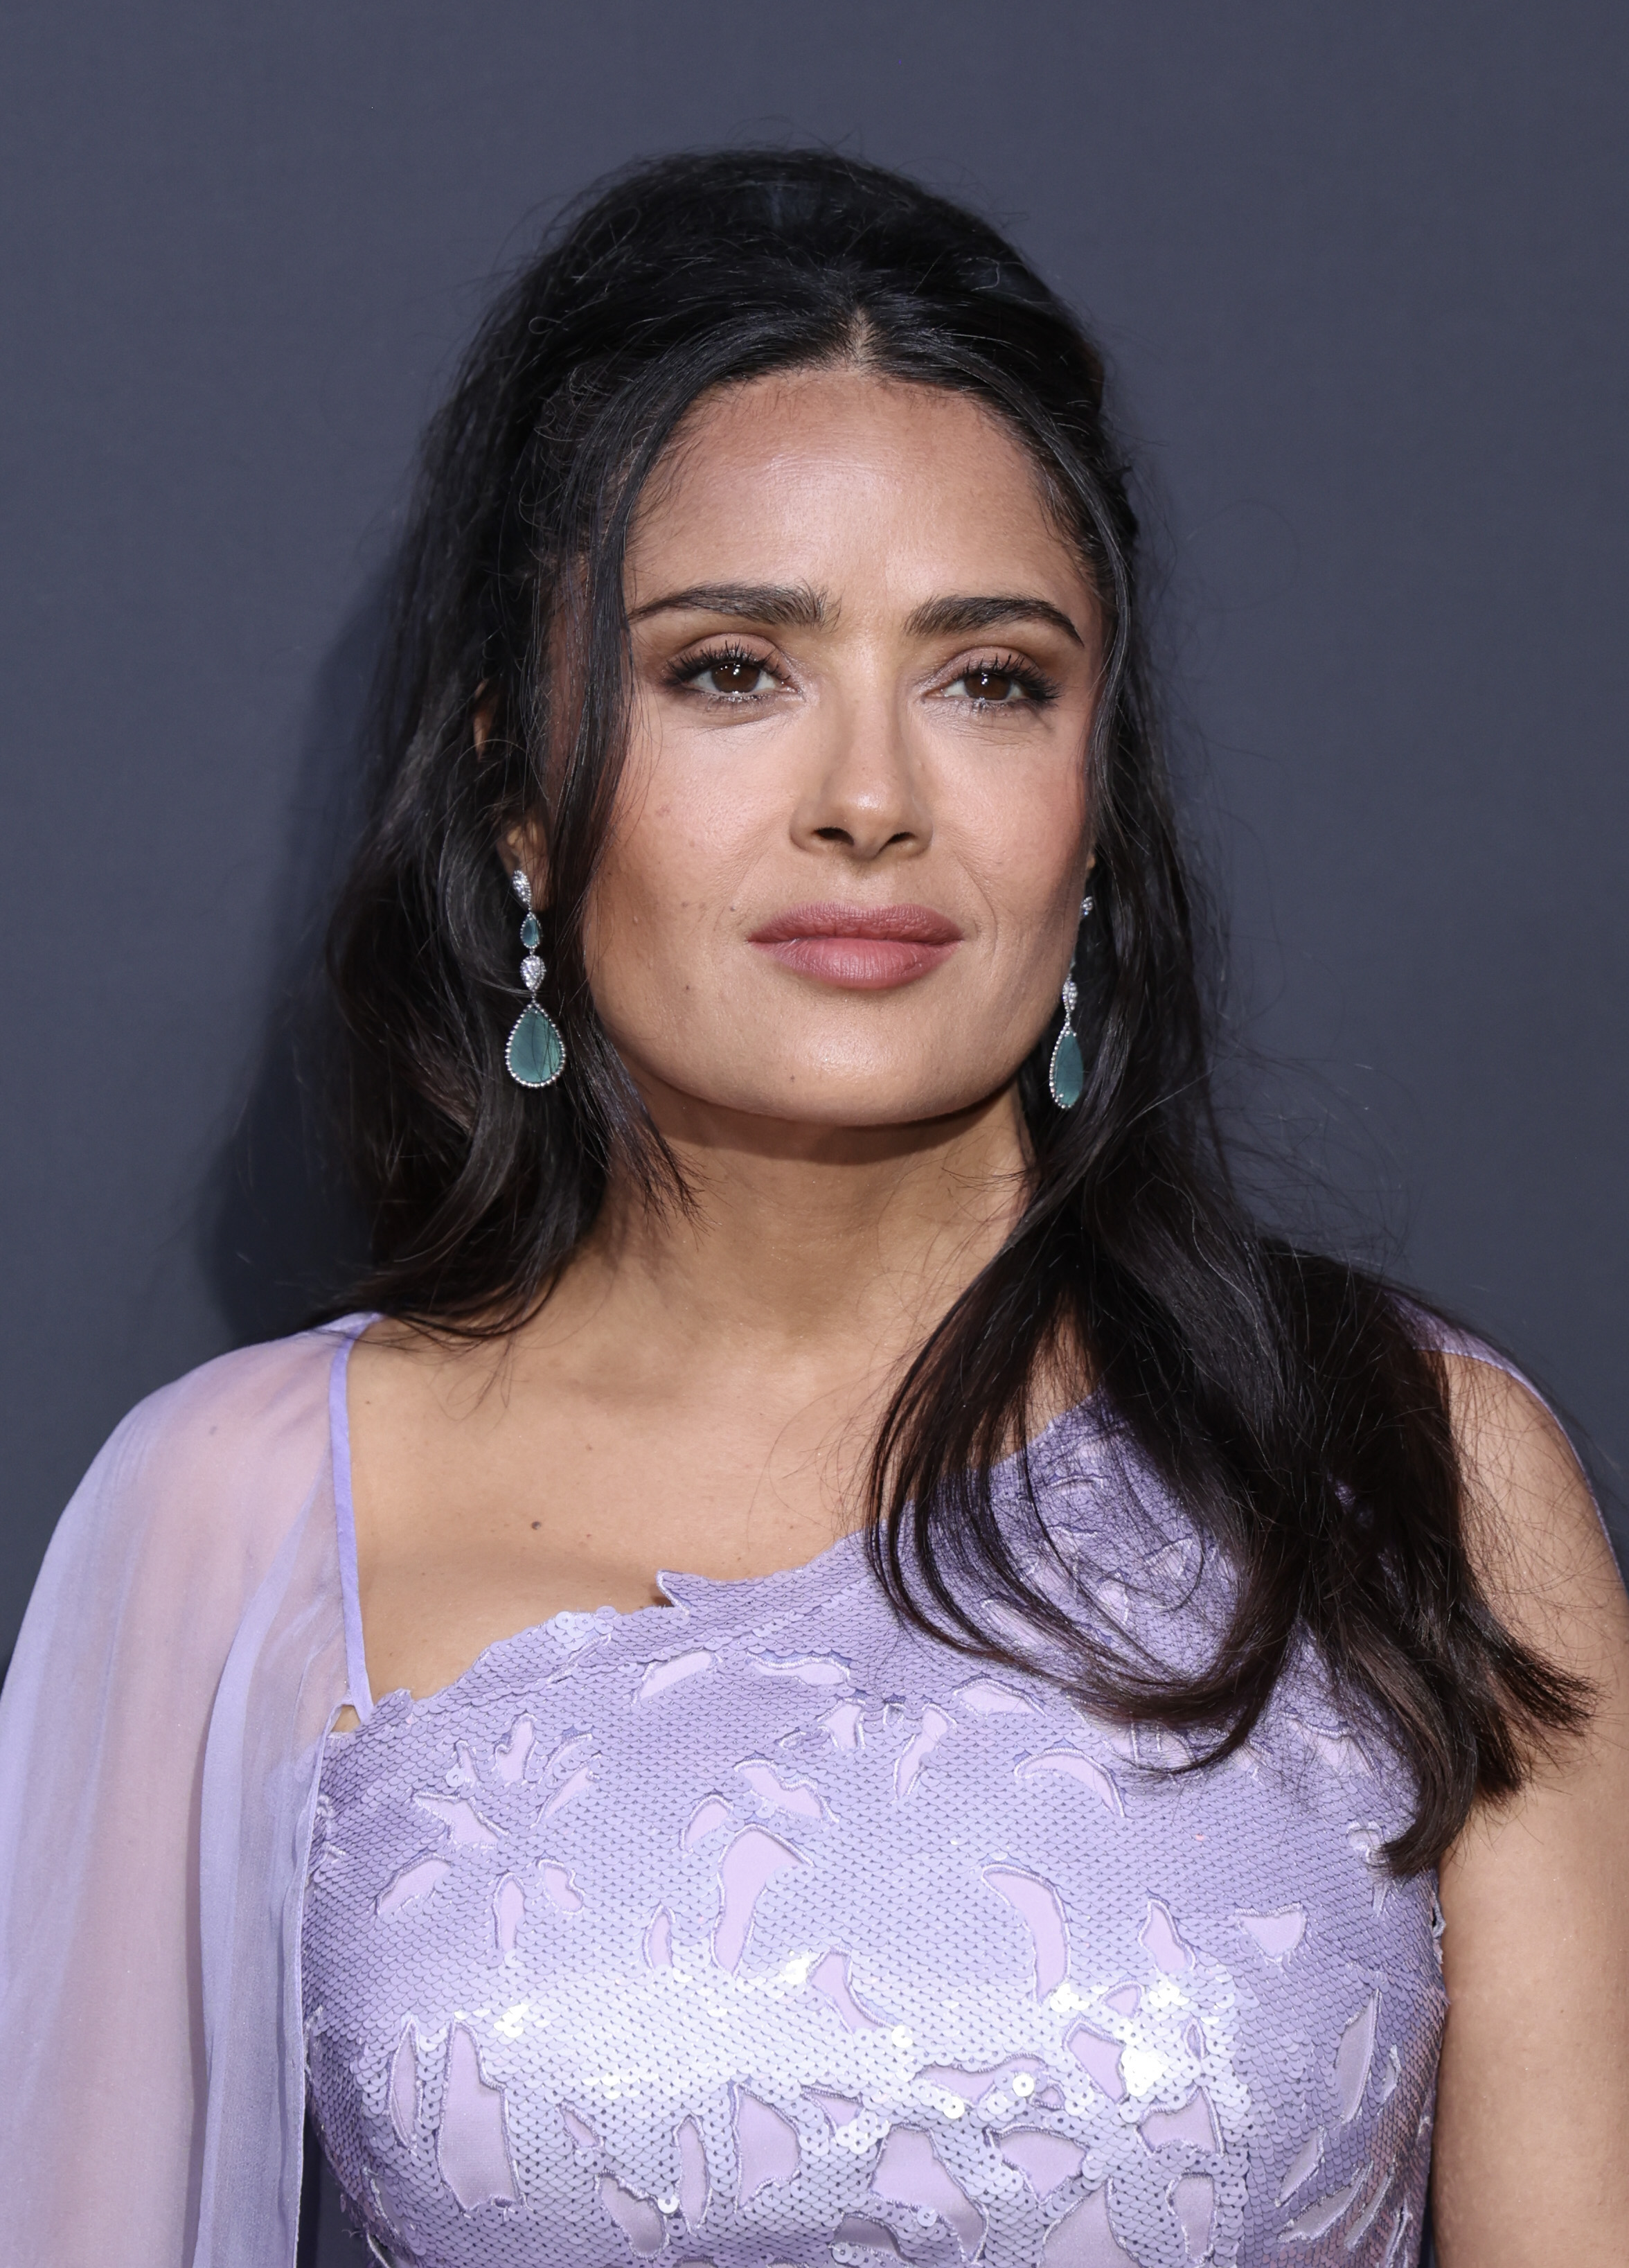 Salma Hayek during the 77th annual Cannes Film Festival at on May 19, 2024, in Cannes, France. | Source: Getty Images